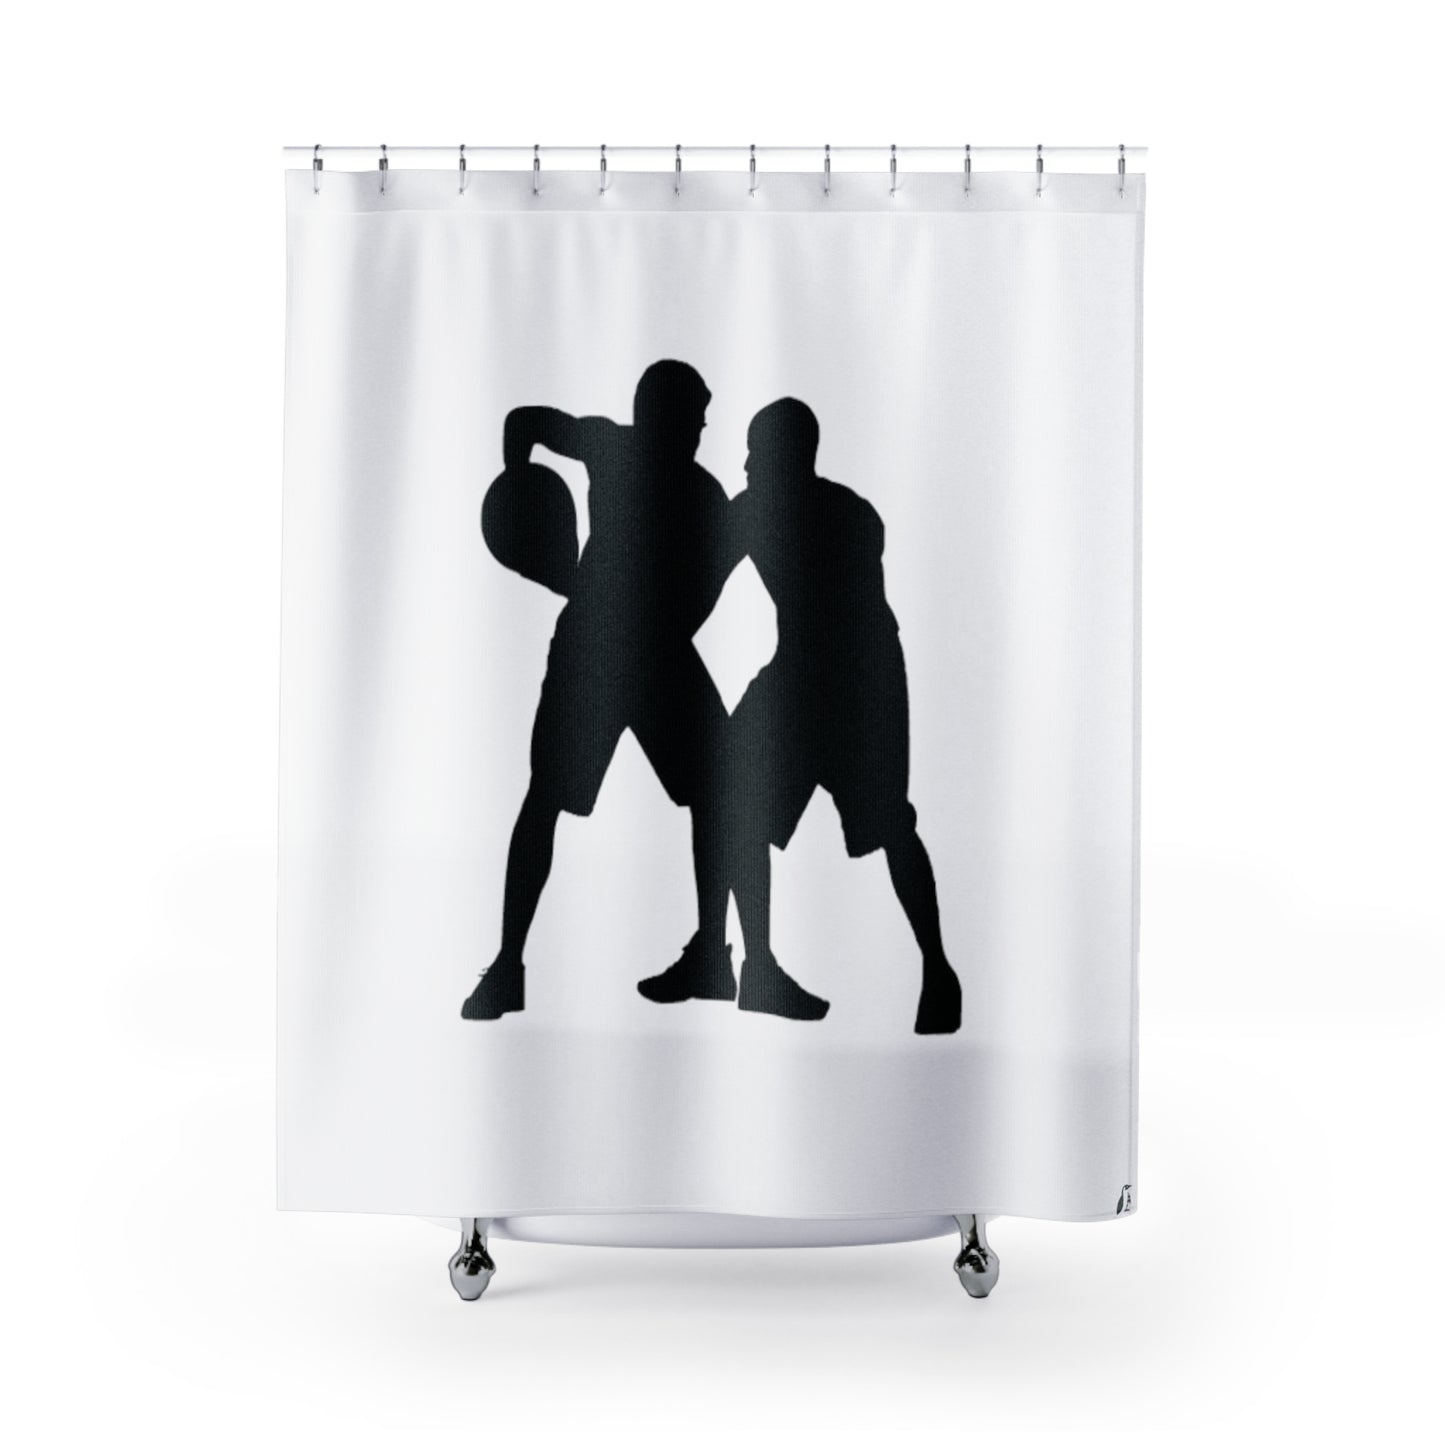 Shower Curtains: #1 Basketball White